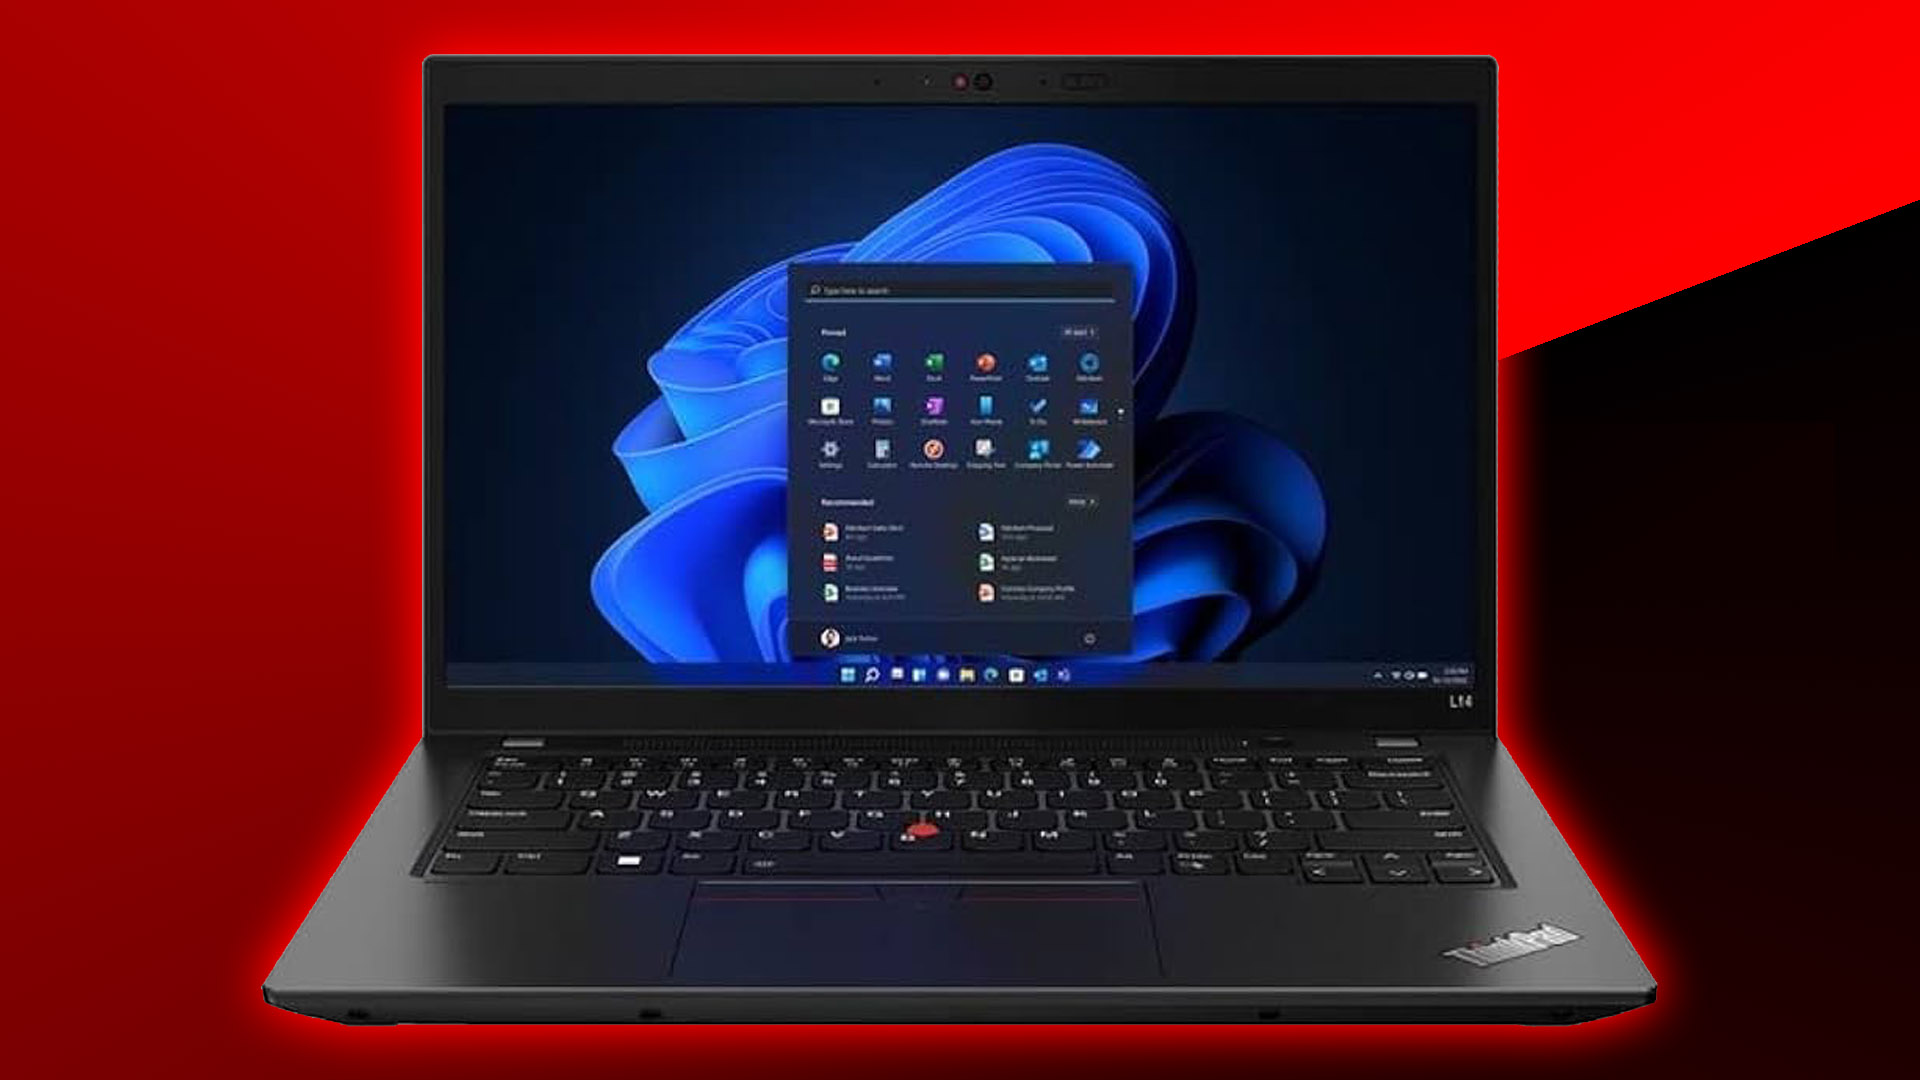 This refurb ThinkPad laptop with 16GB of RAM is just $365